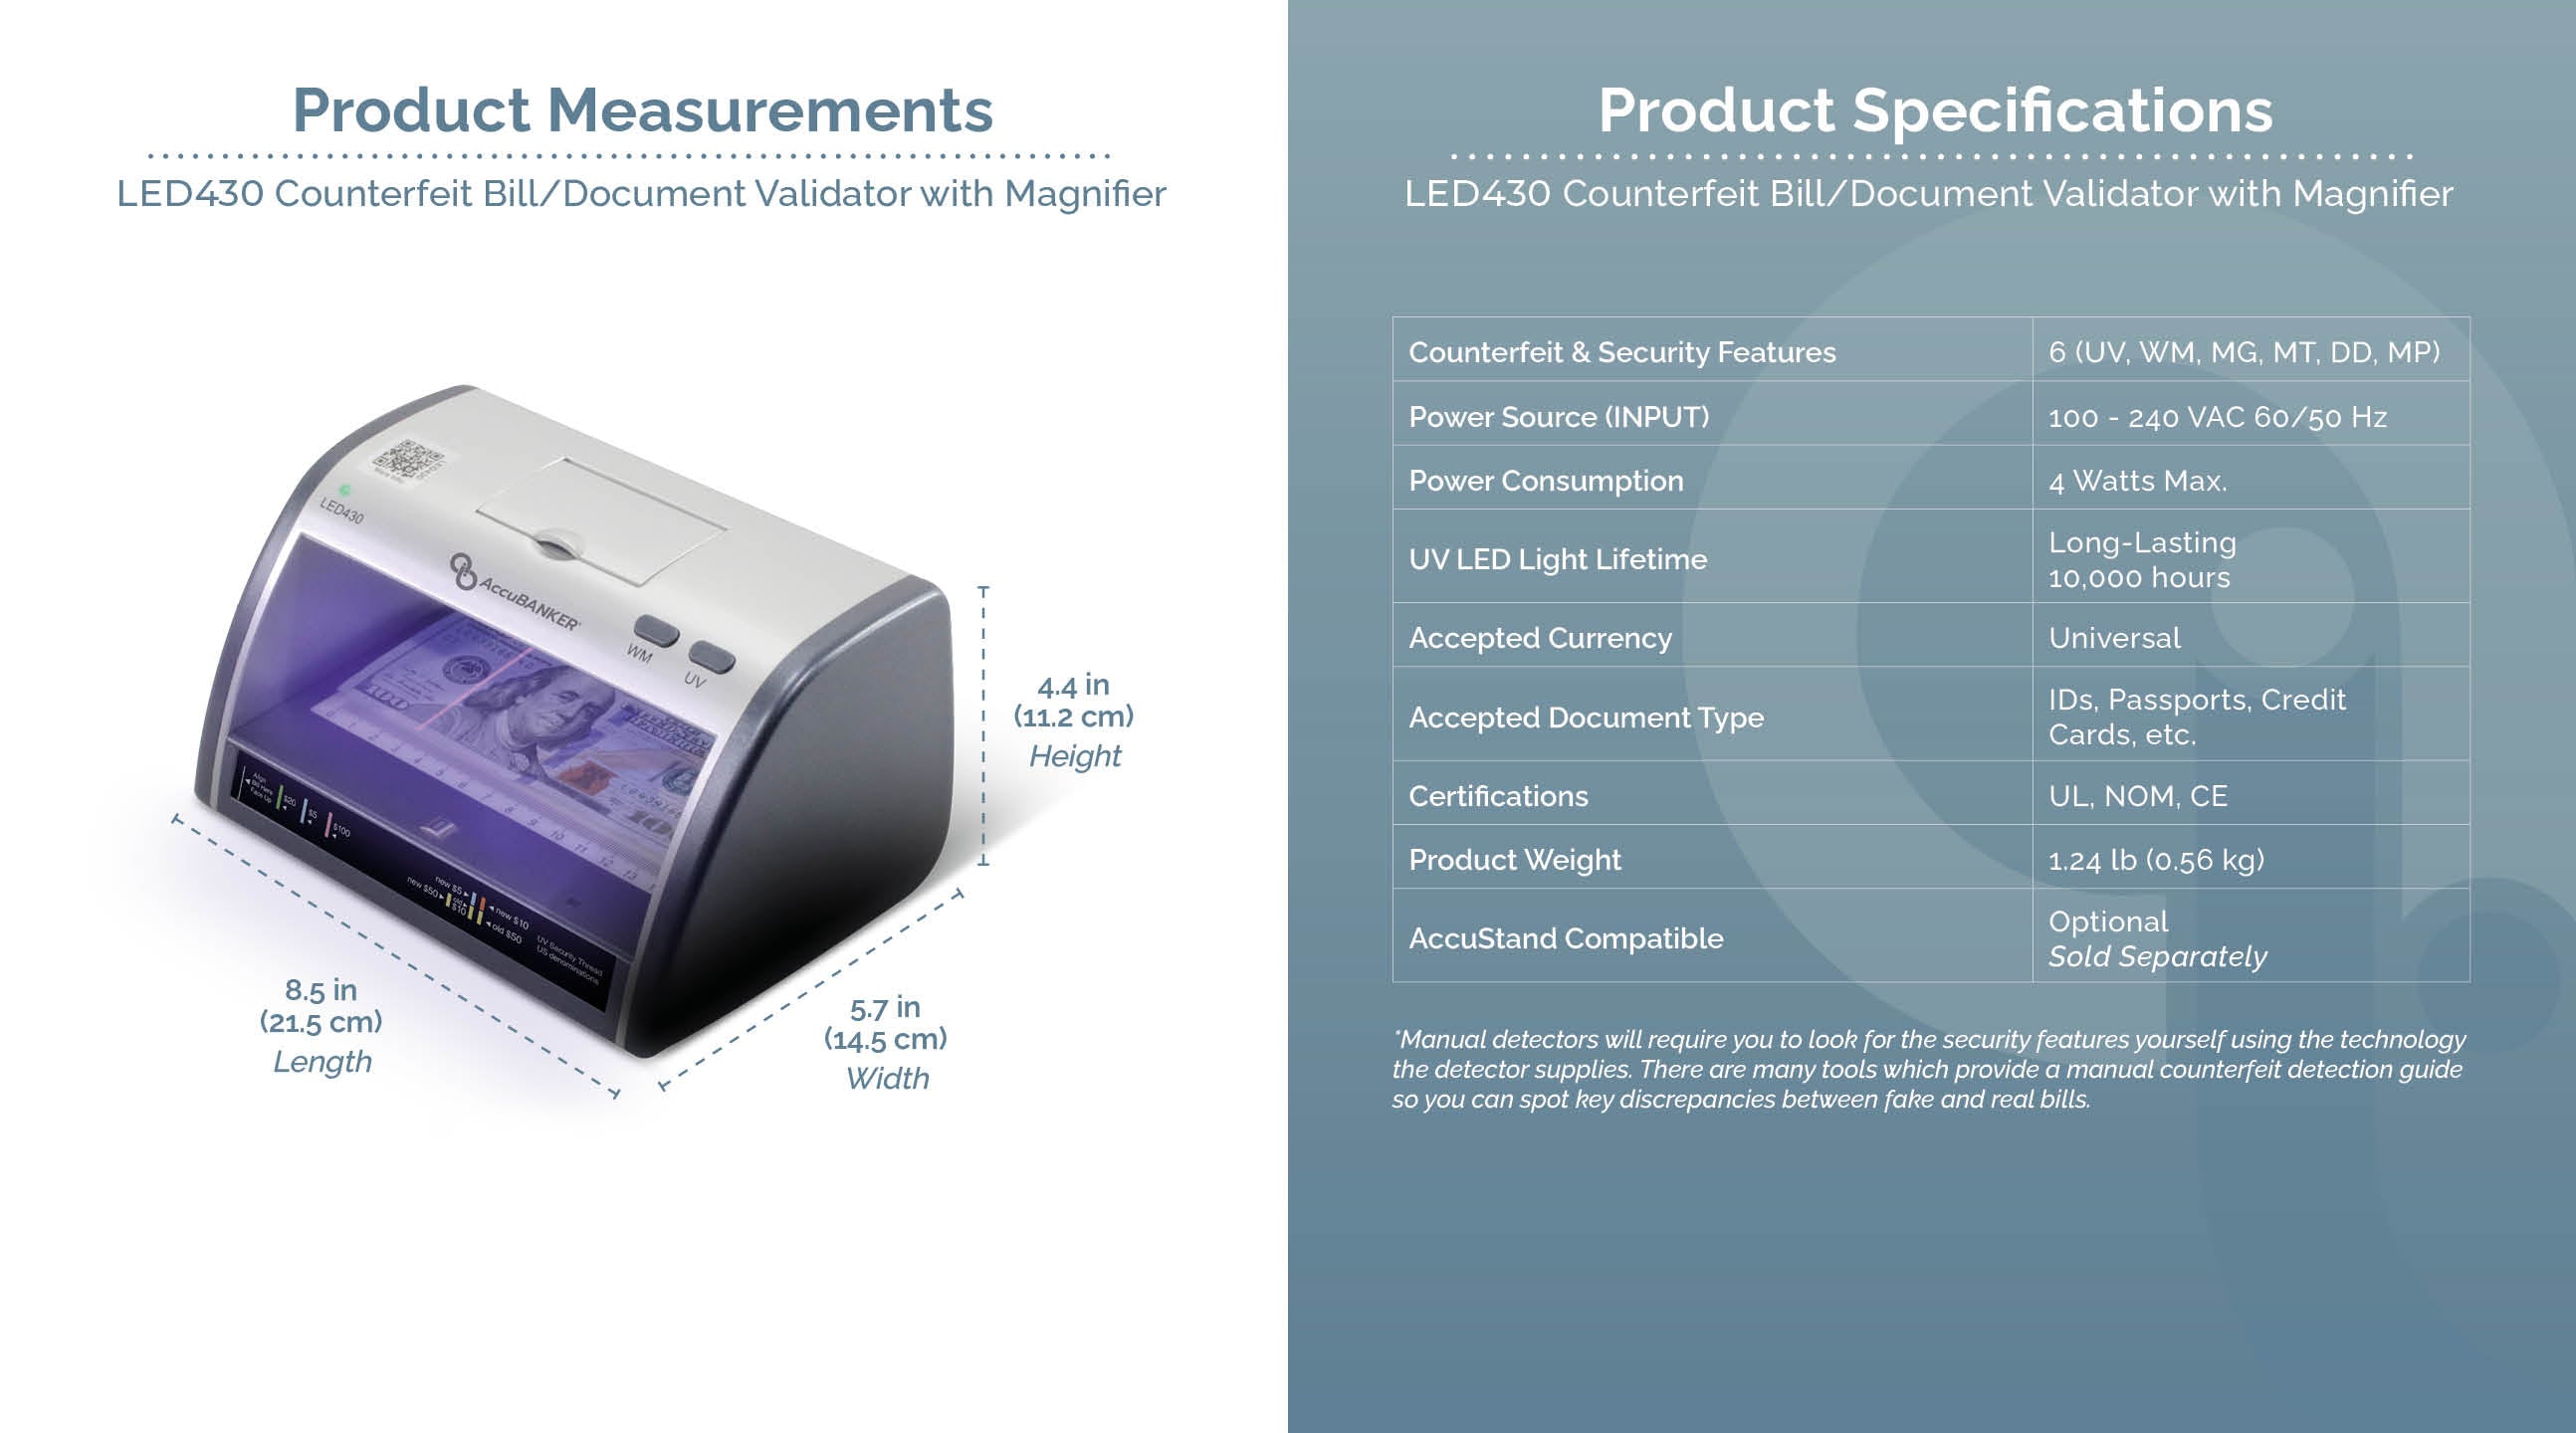 LED430 Counterfeit Bill/ Document Validator with Magnifier Features & Specifications